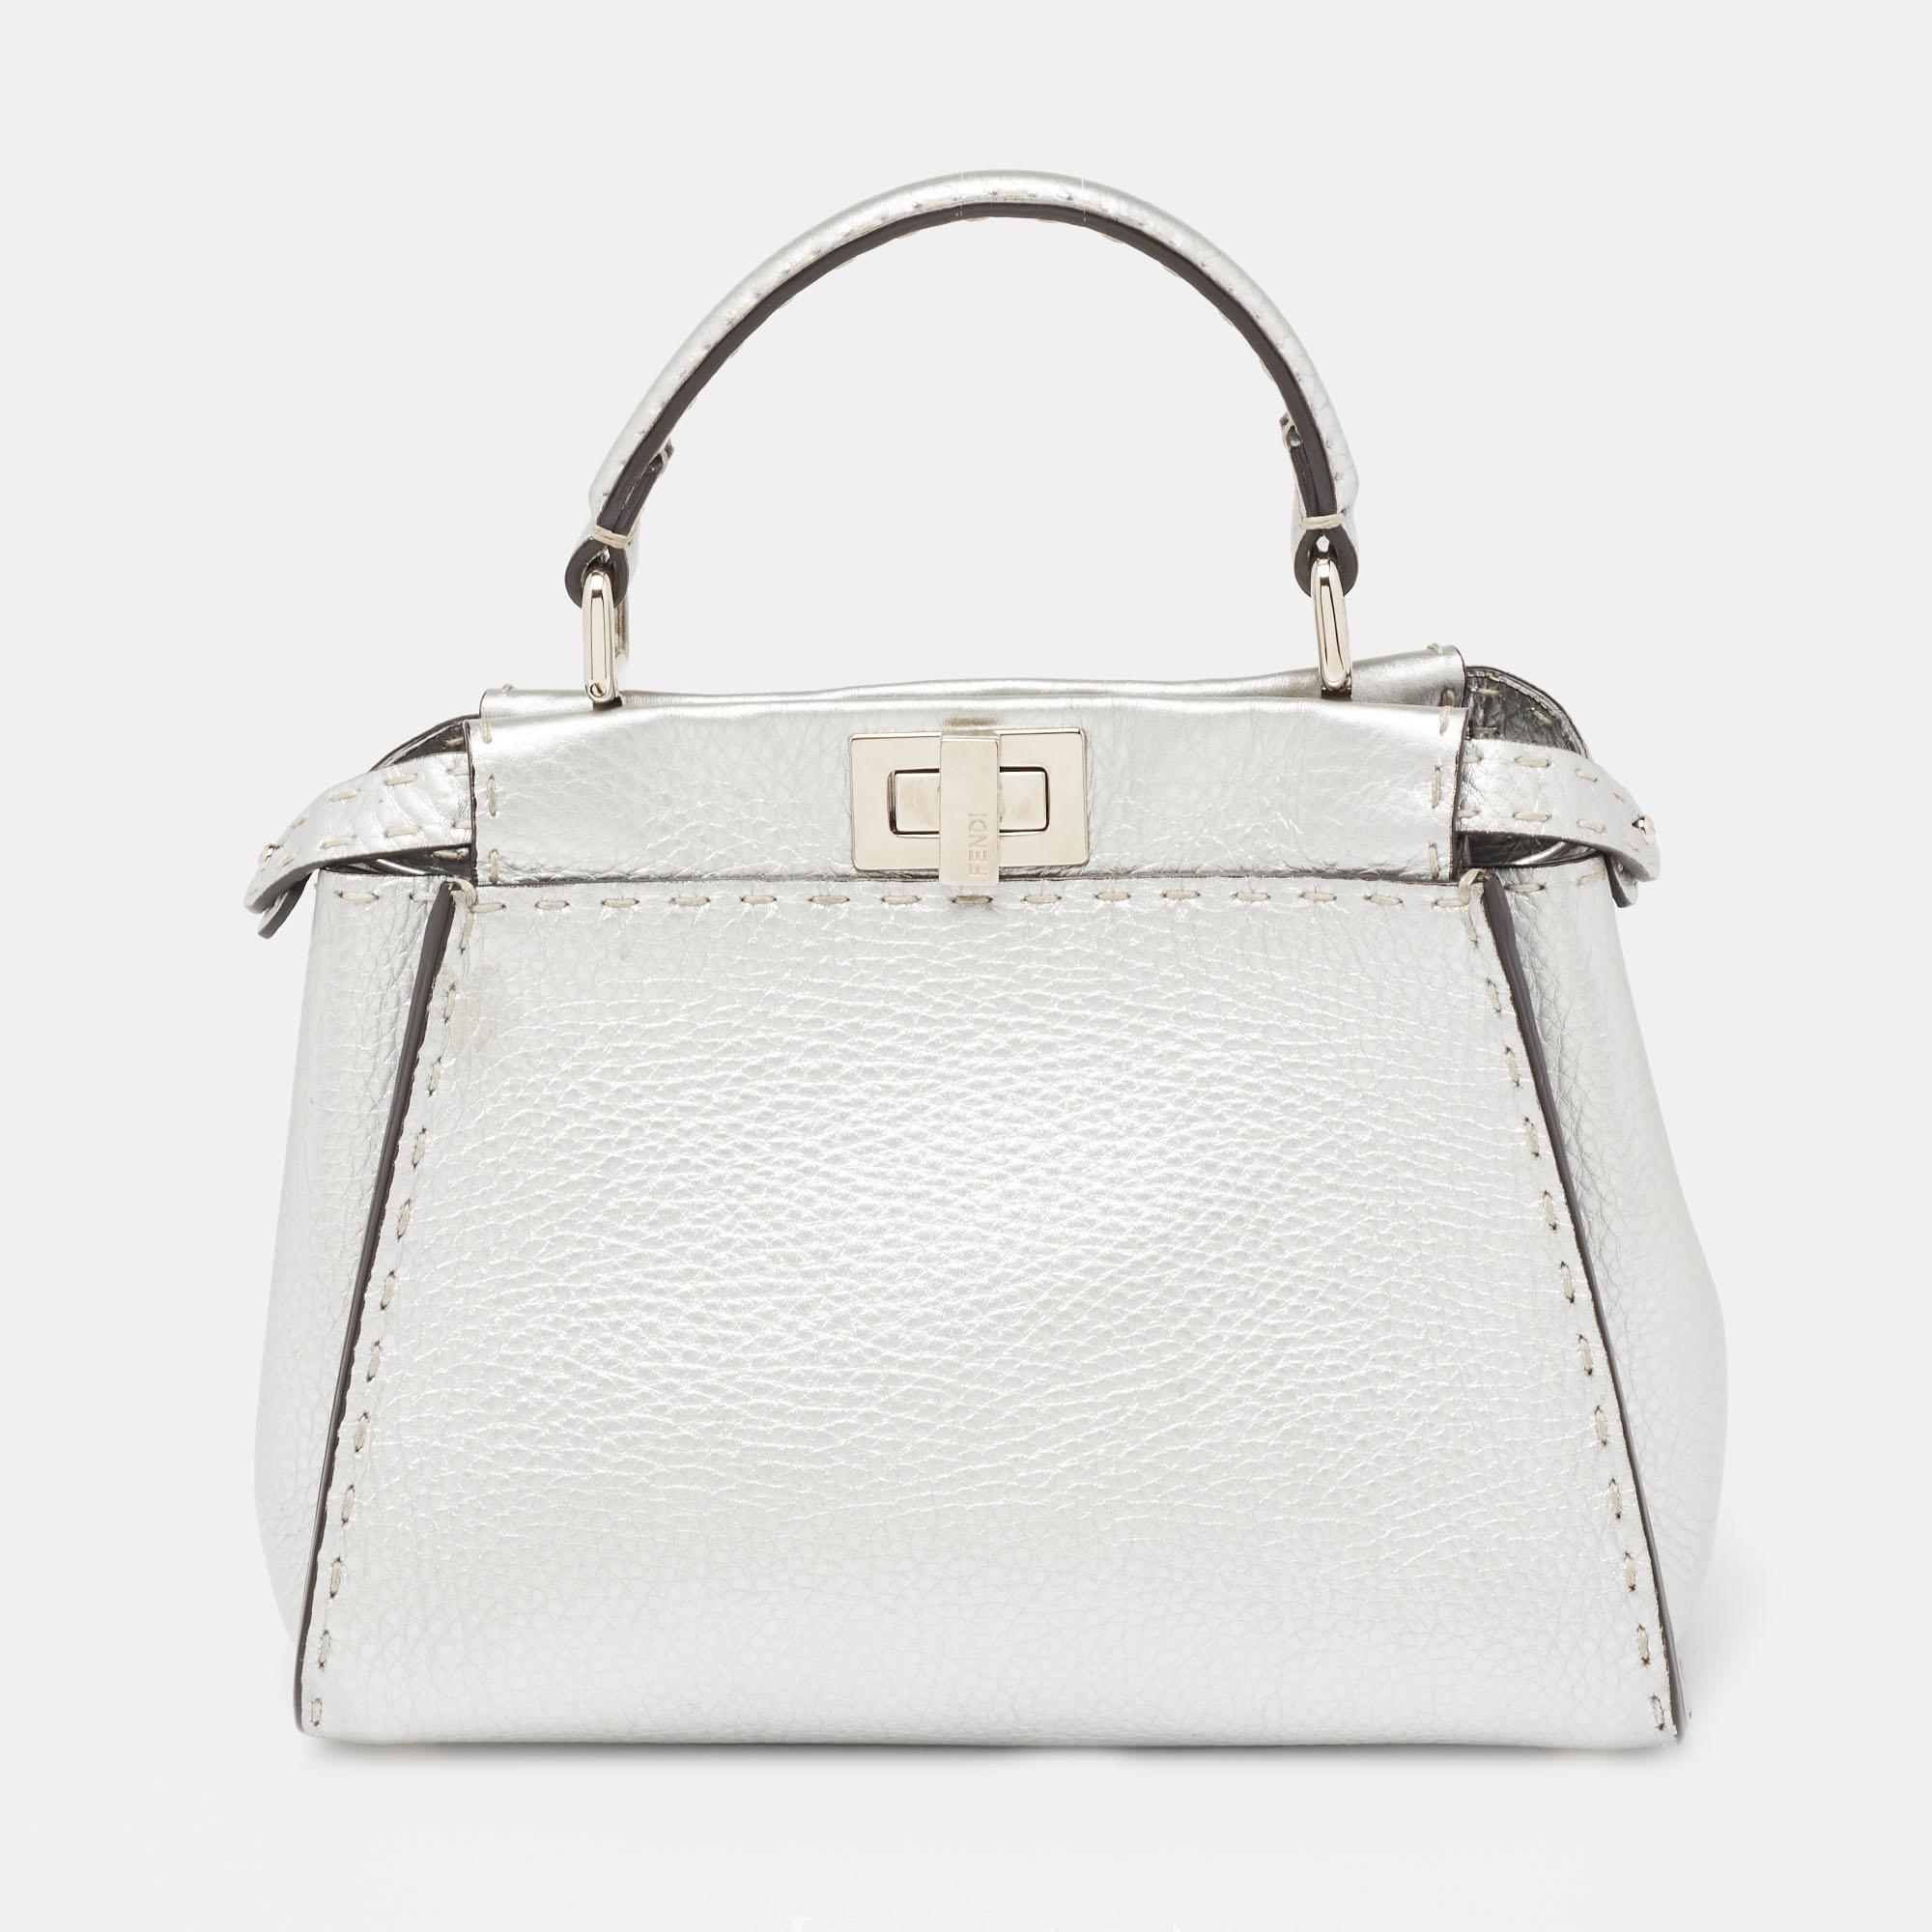 The unique construction and representation of this Fendi Mini Peekaboo bag enable it to keep up with fashion's ever-changing tide. Constructed from leather, it is complemented with silver-tone hardware, a single handle, and a shoulder strap. The